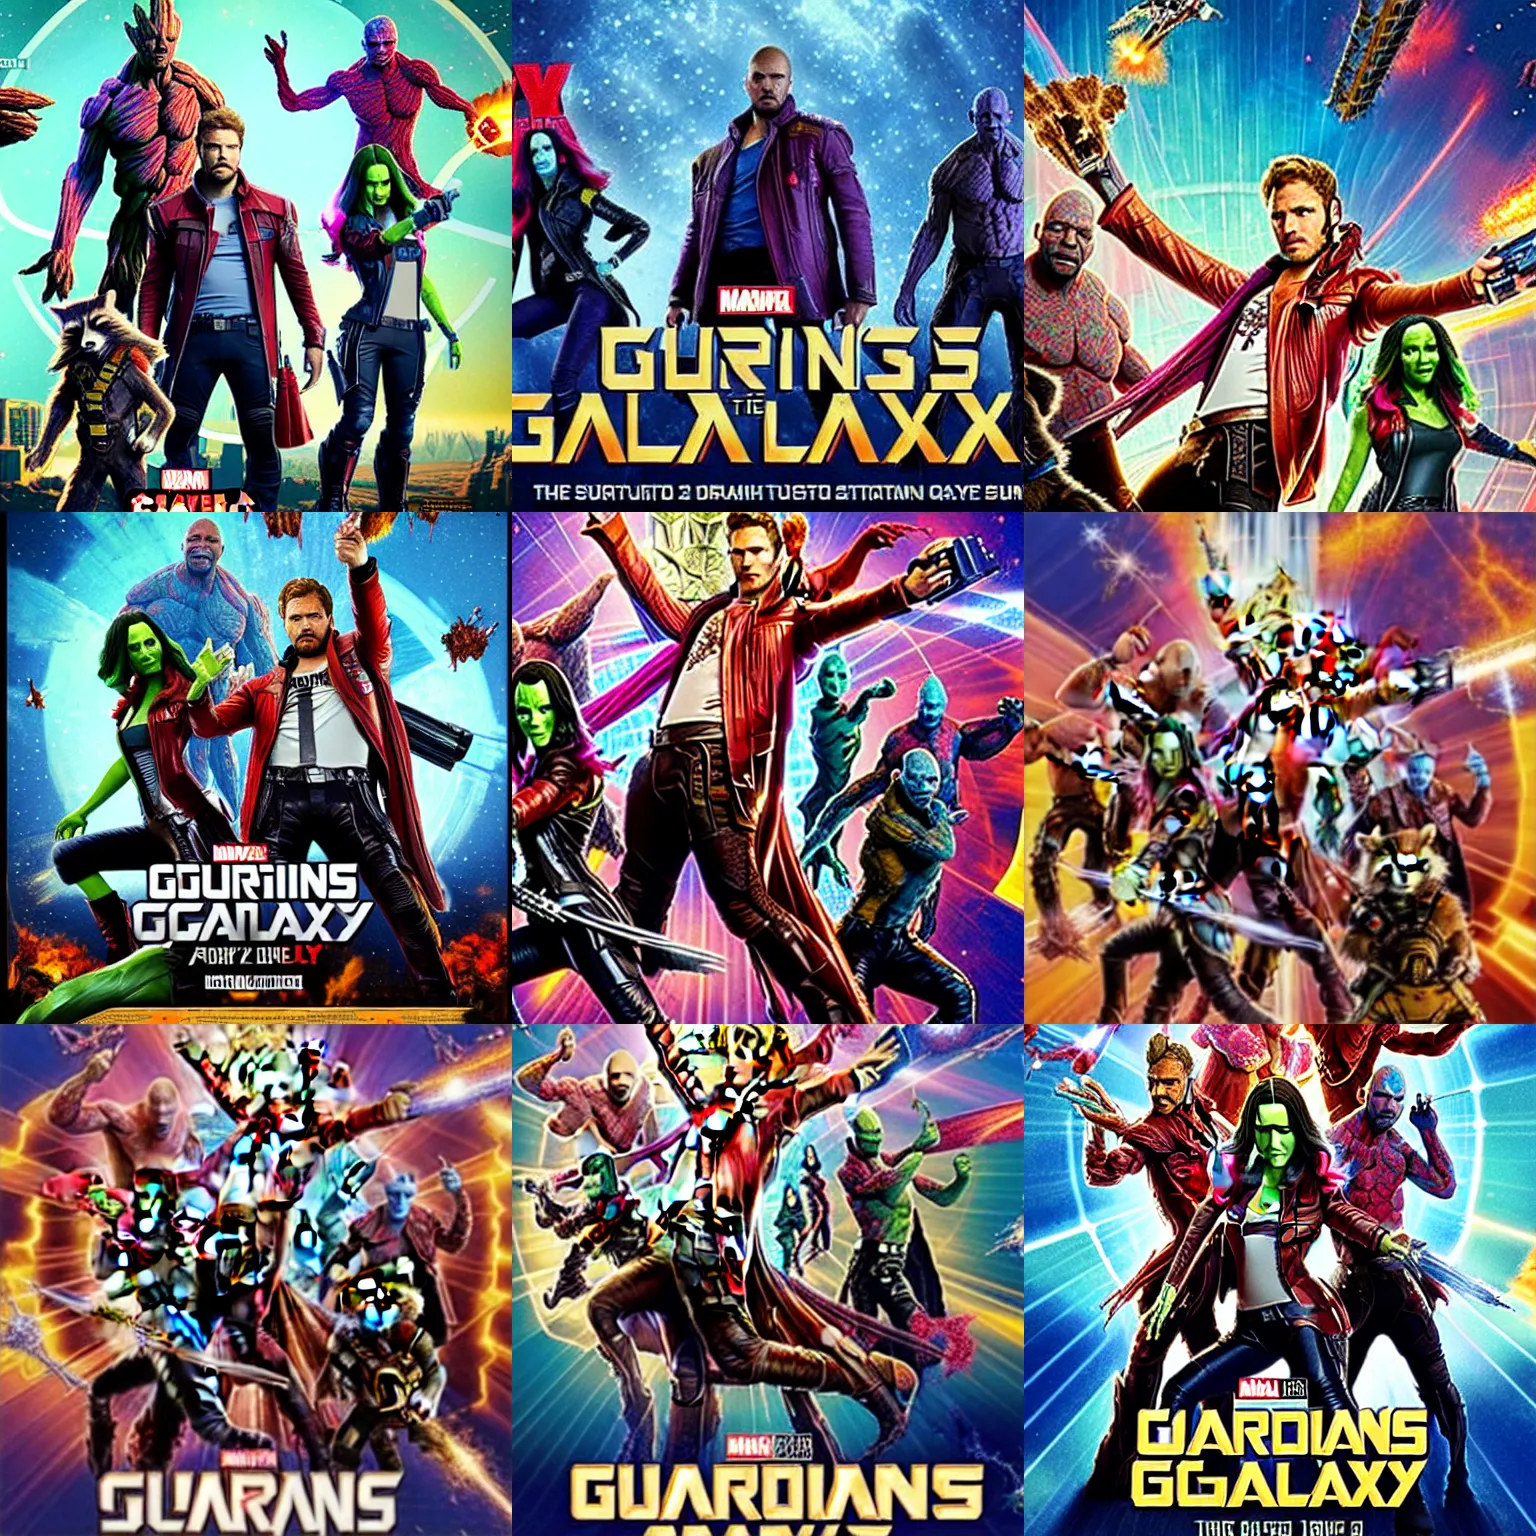 Prompt: The Guardians of the Galaxy movie poster GTA style